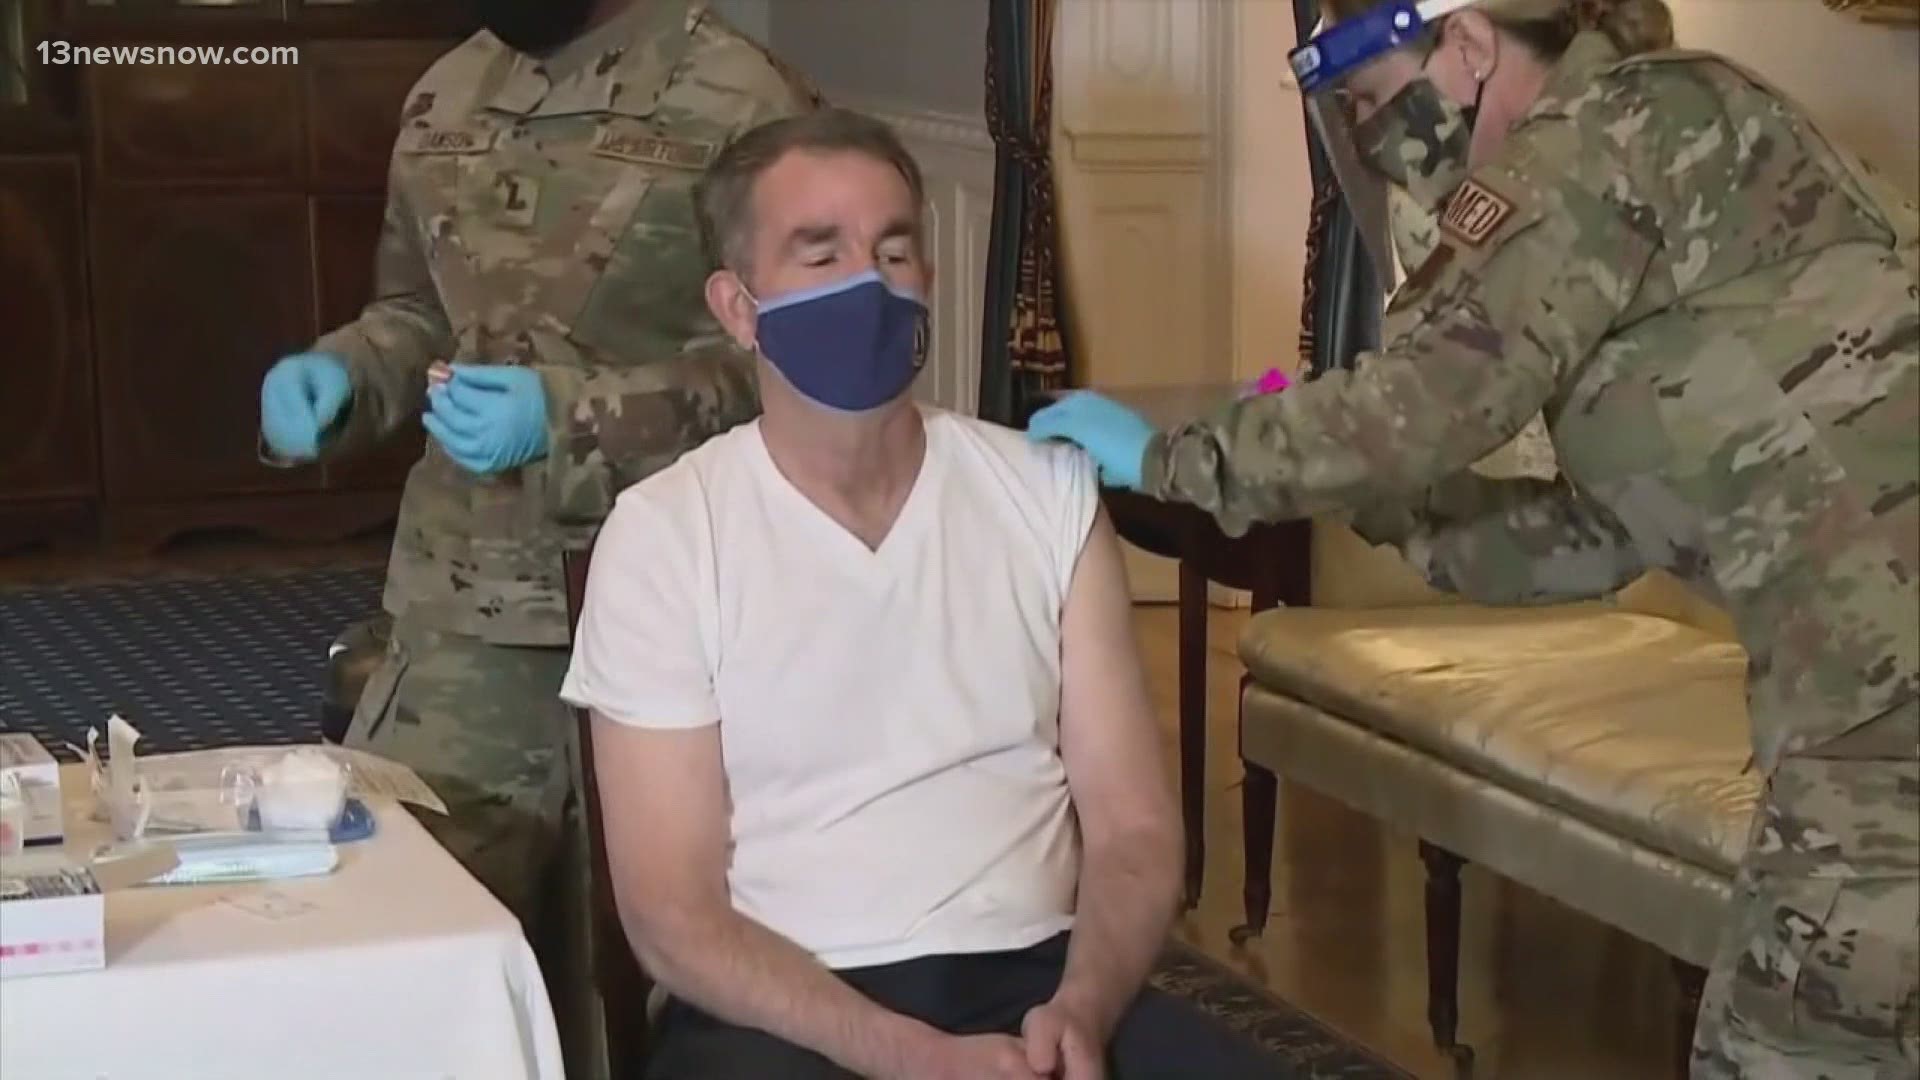 Governor Ralph Northam and his wife Pam sat down for their doses of the vaccine on Monday.